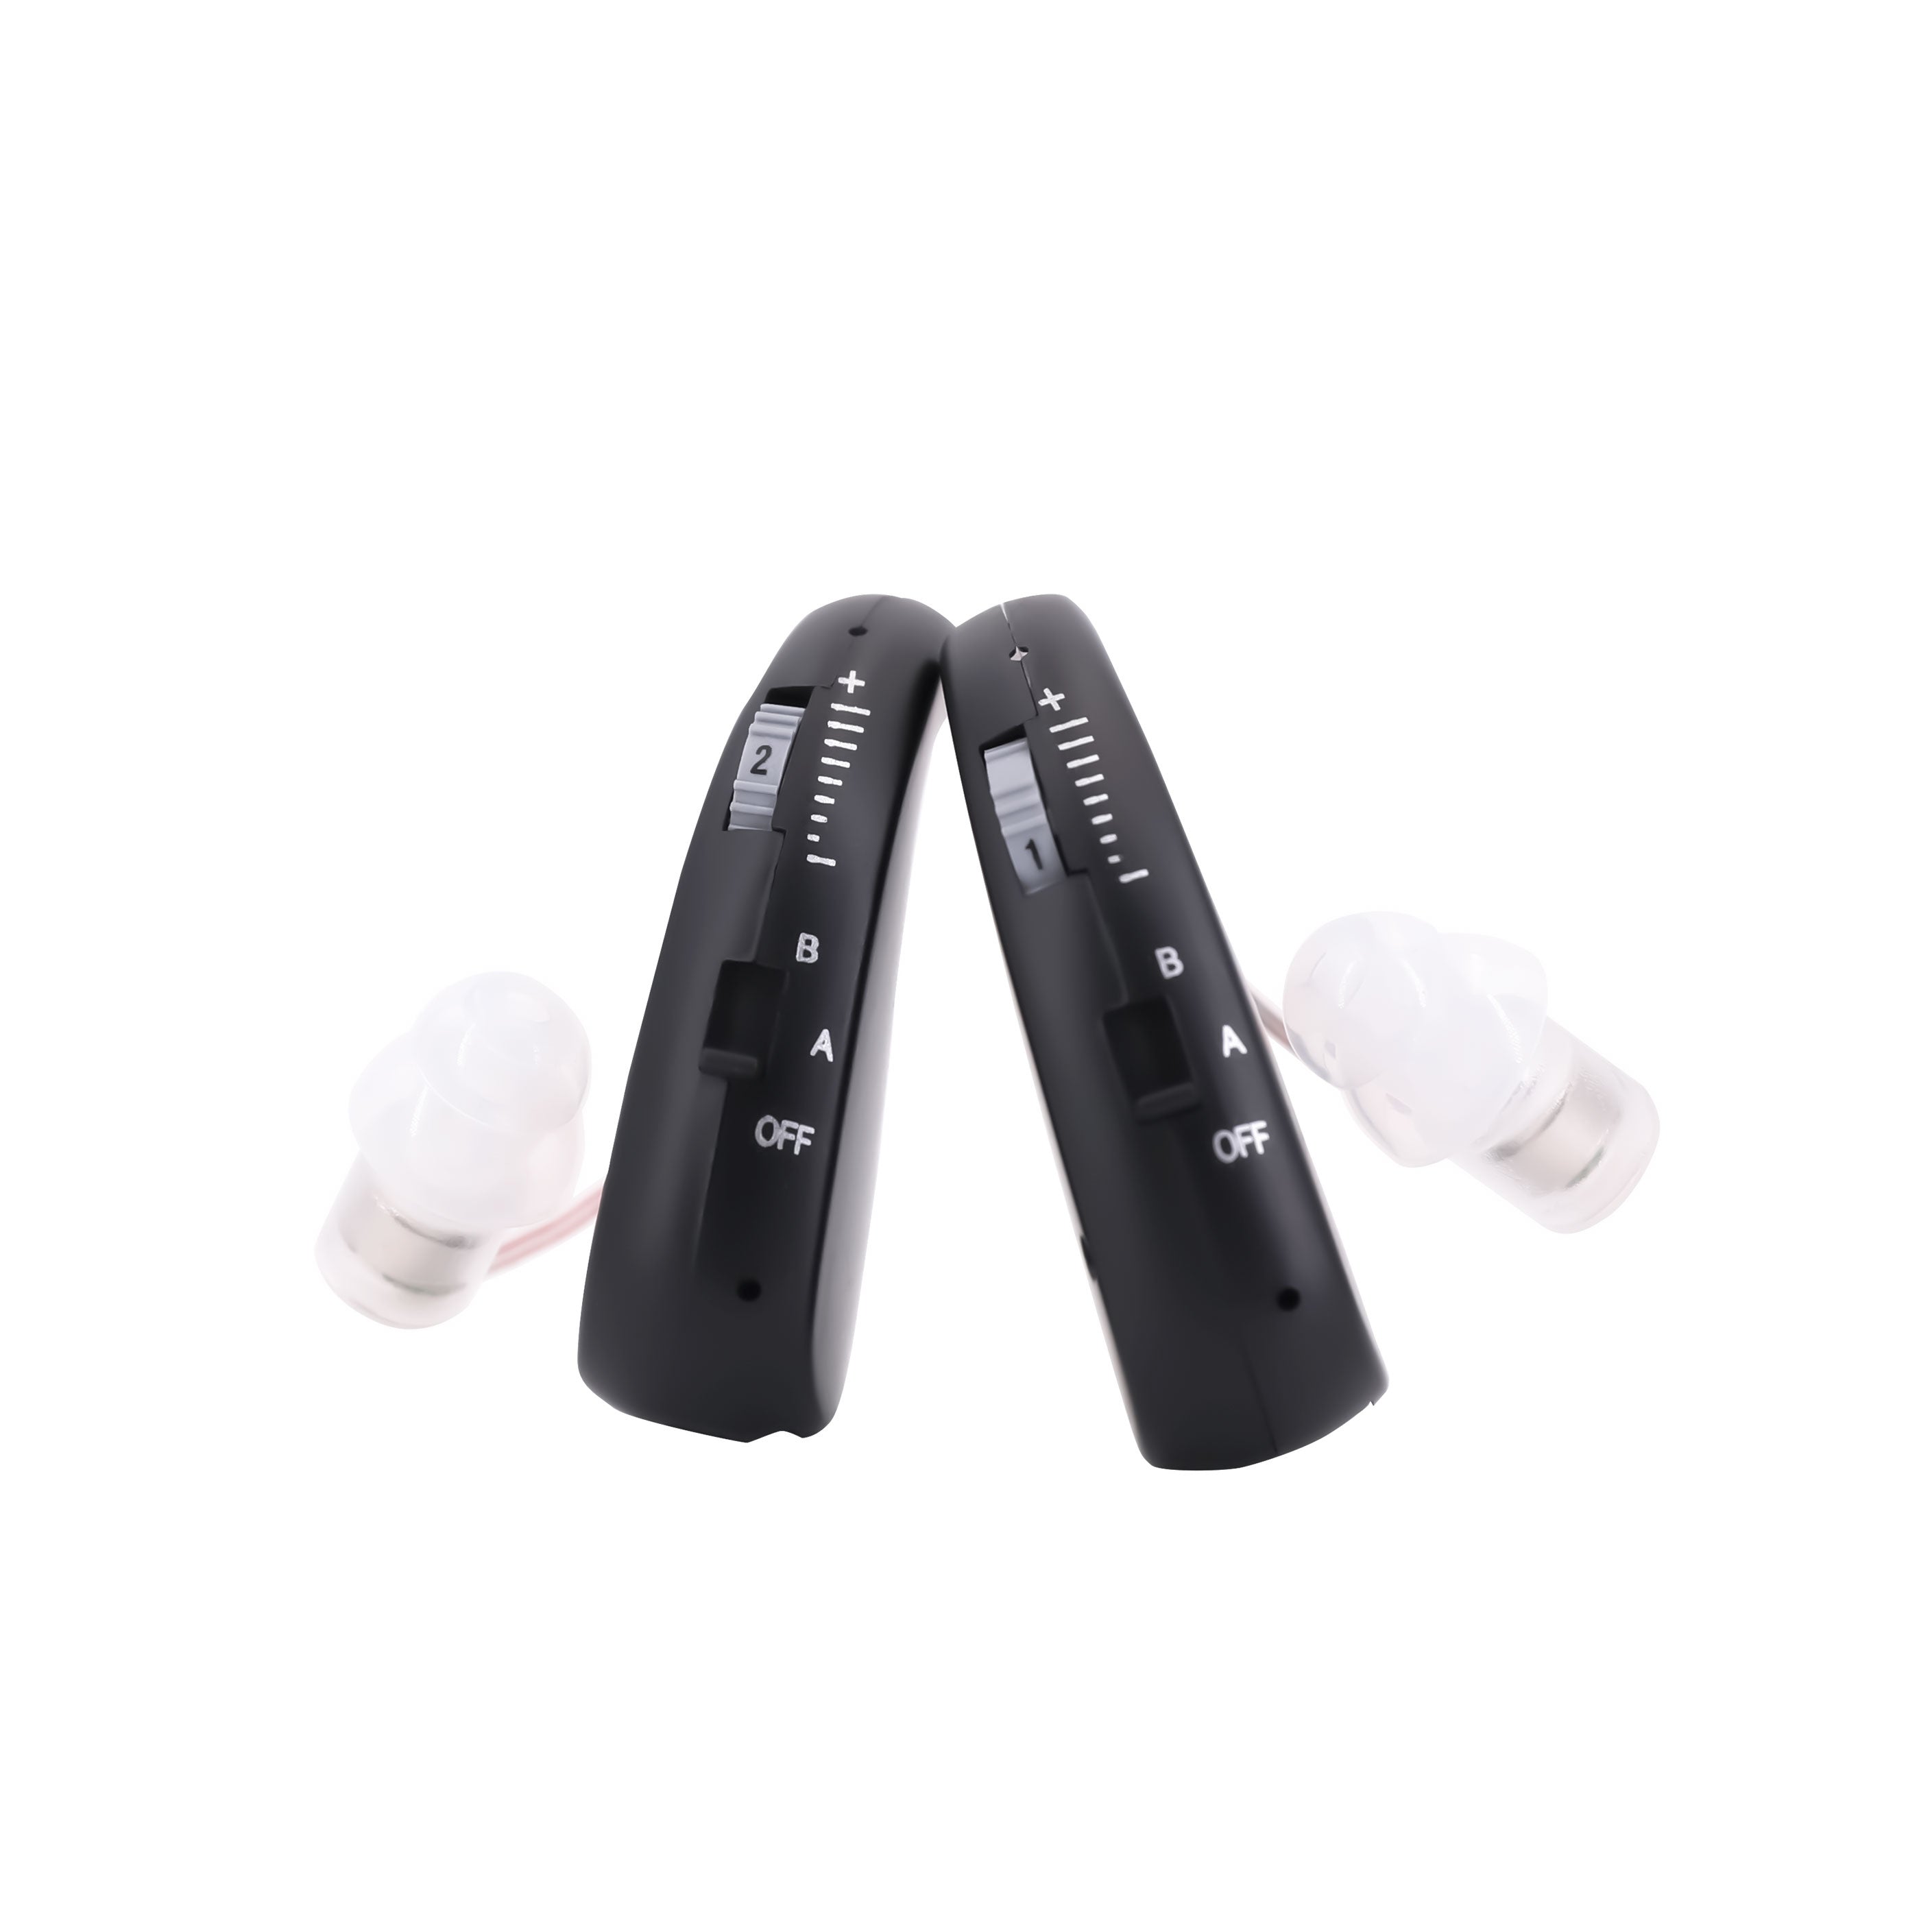 Fisdemo Stone OTC Long-Time Use Clear Sound FDA-Cleared Affordable Hearing Aids